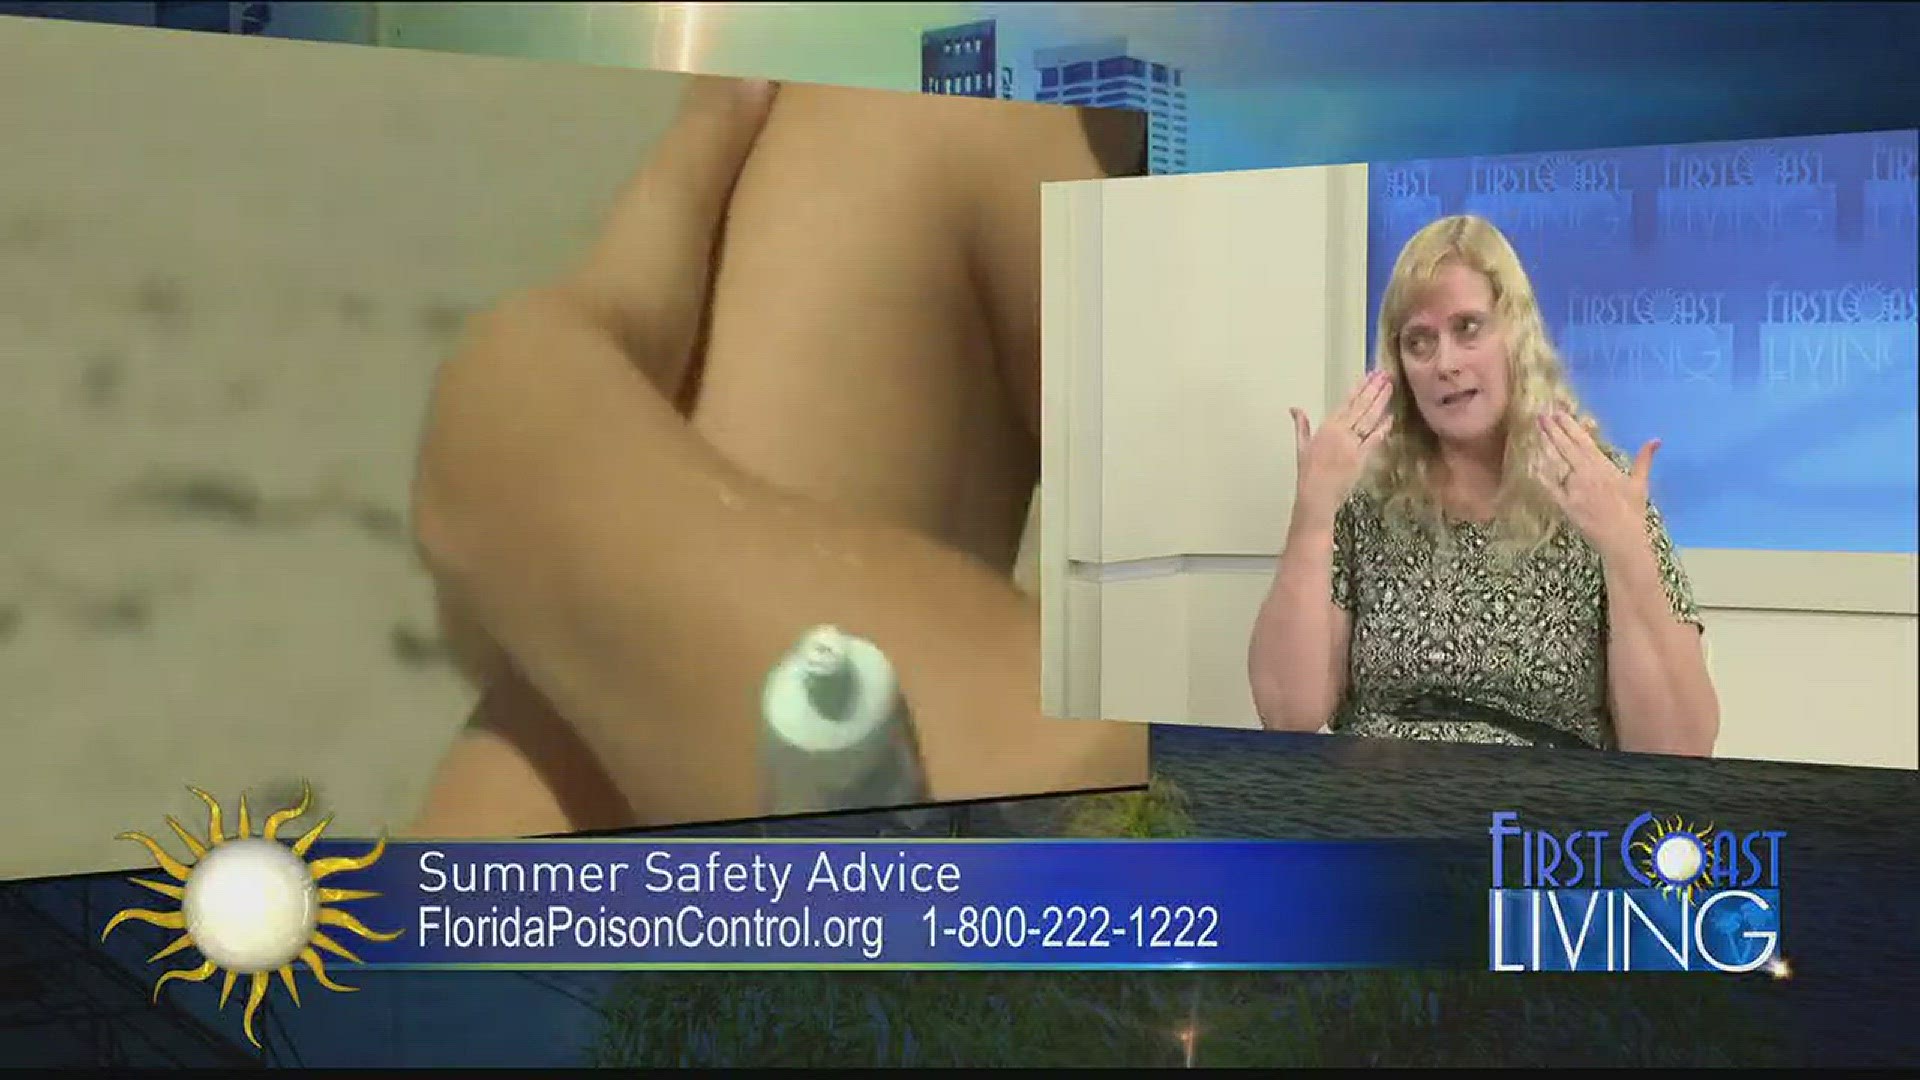 Florida Poison Control gives some Safety Advice for Summer